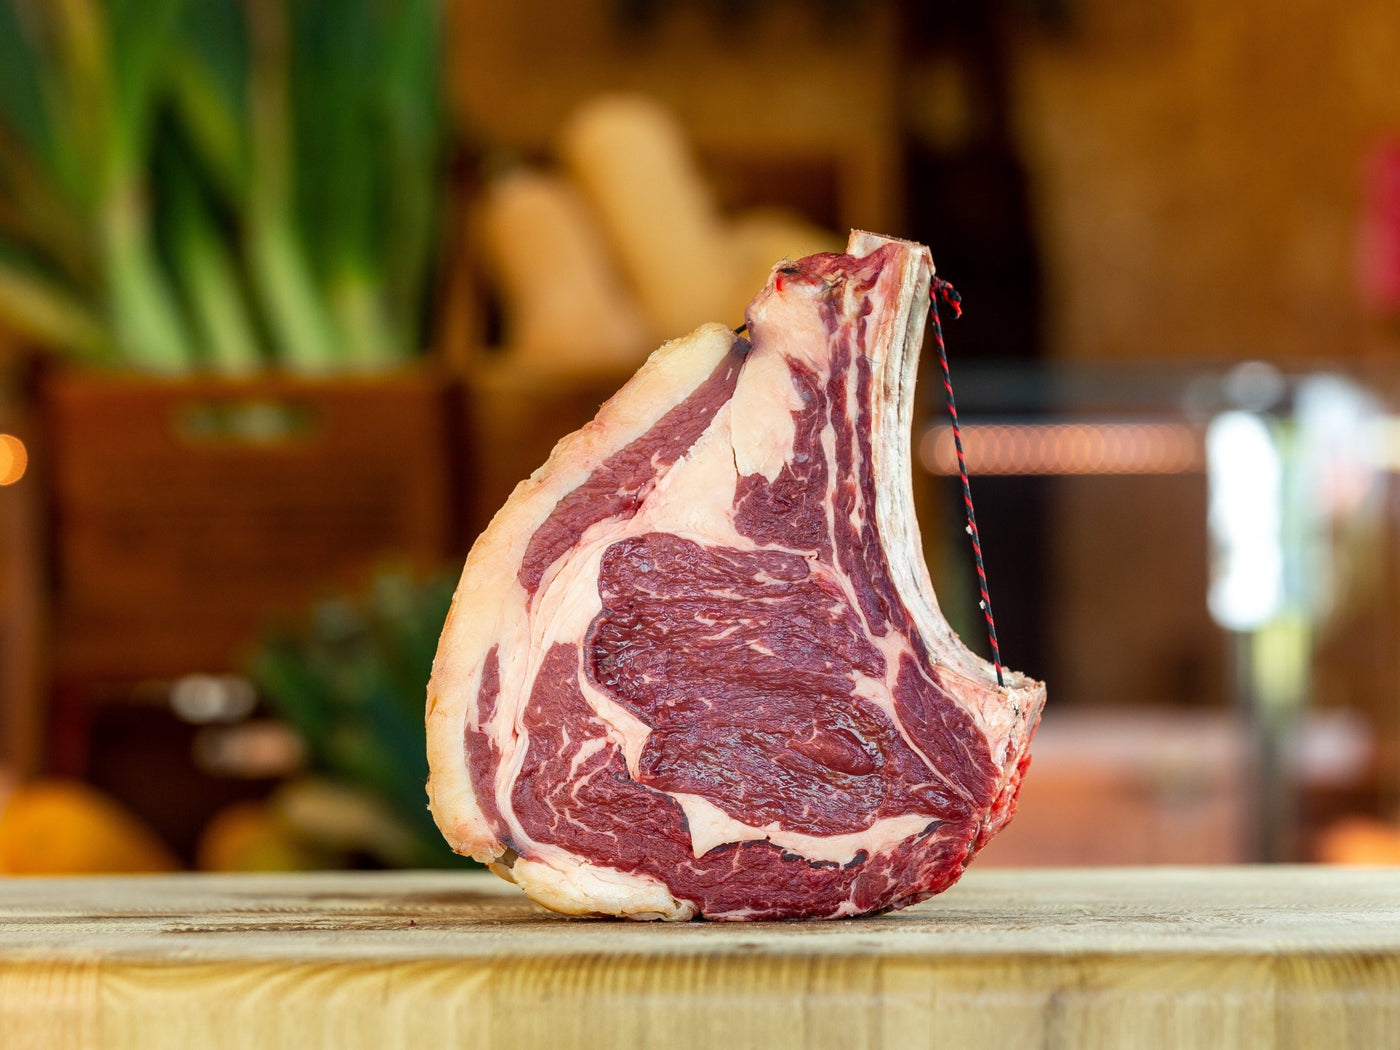 Grass Fed, Dry-Aged Rib Chop - Beef - Thomas Joseph Butchery - Ethical Dry-Aged Meat The Best Steak UK Thomas Joseph Butchery